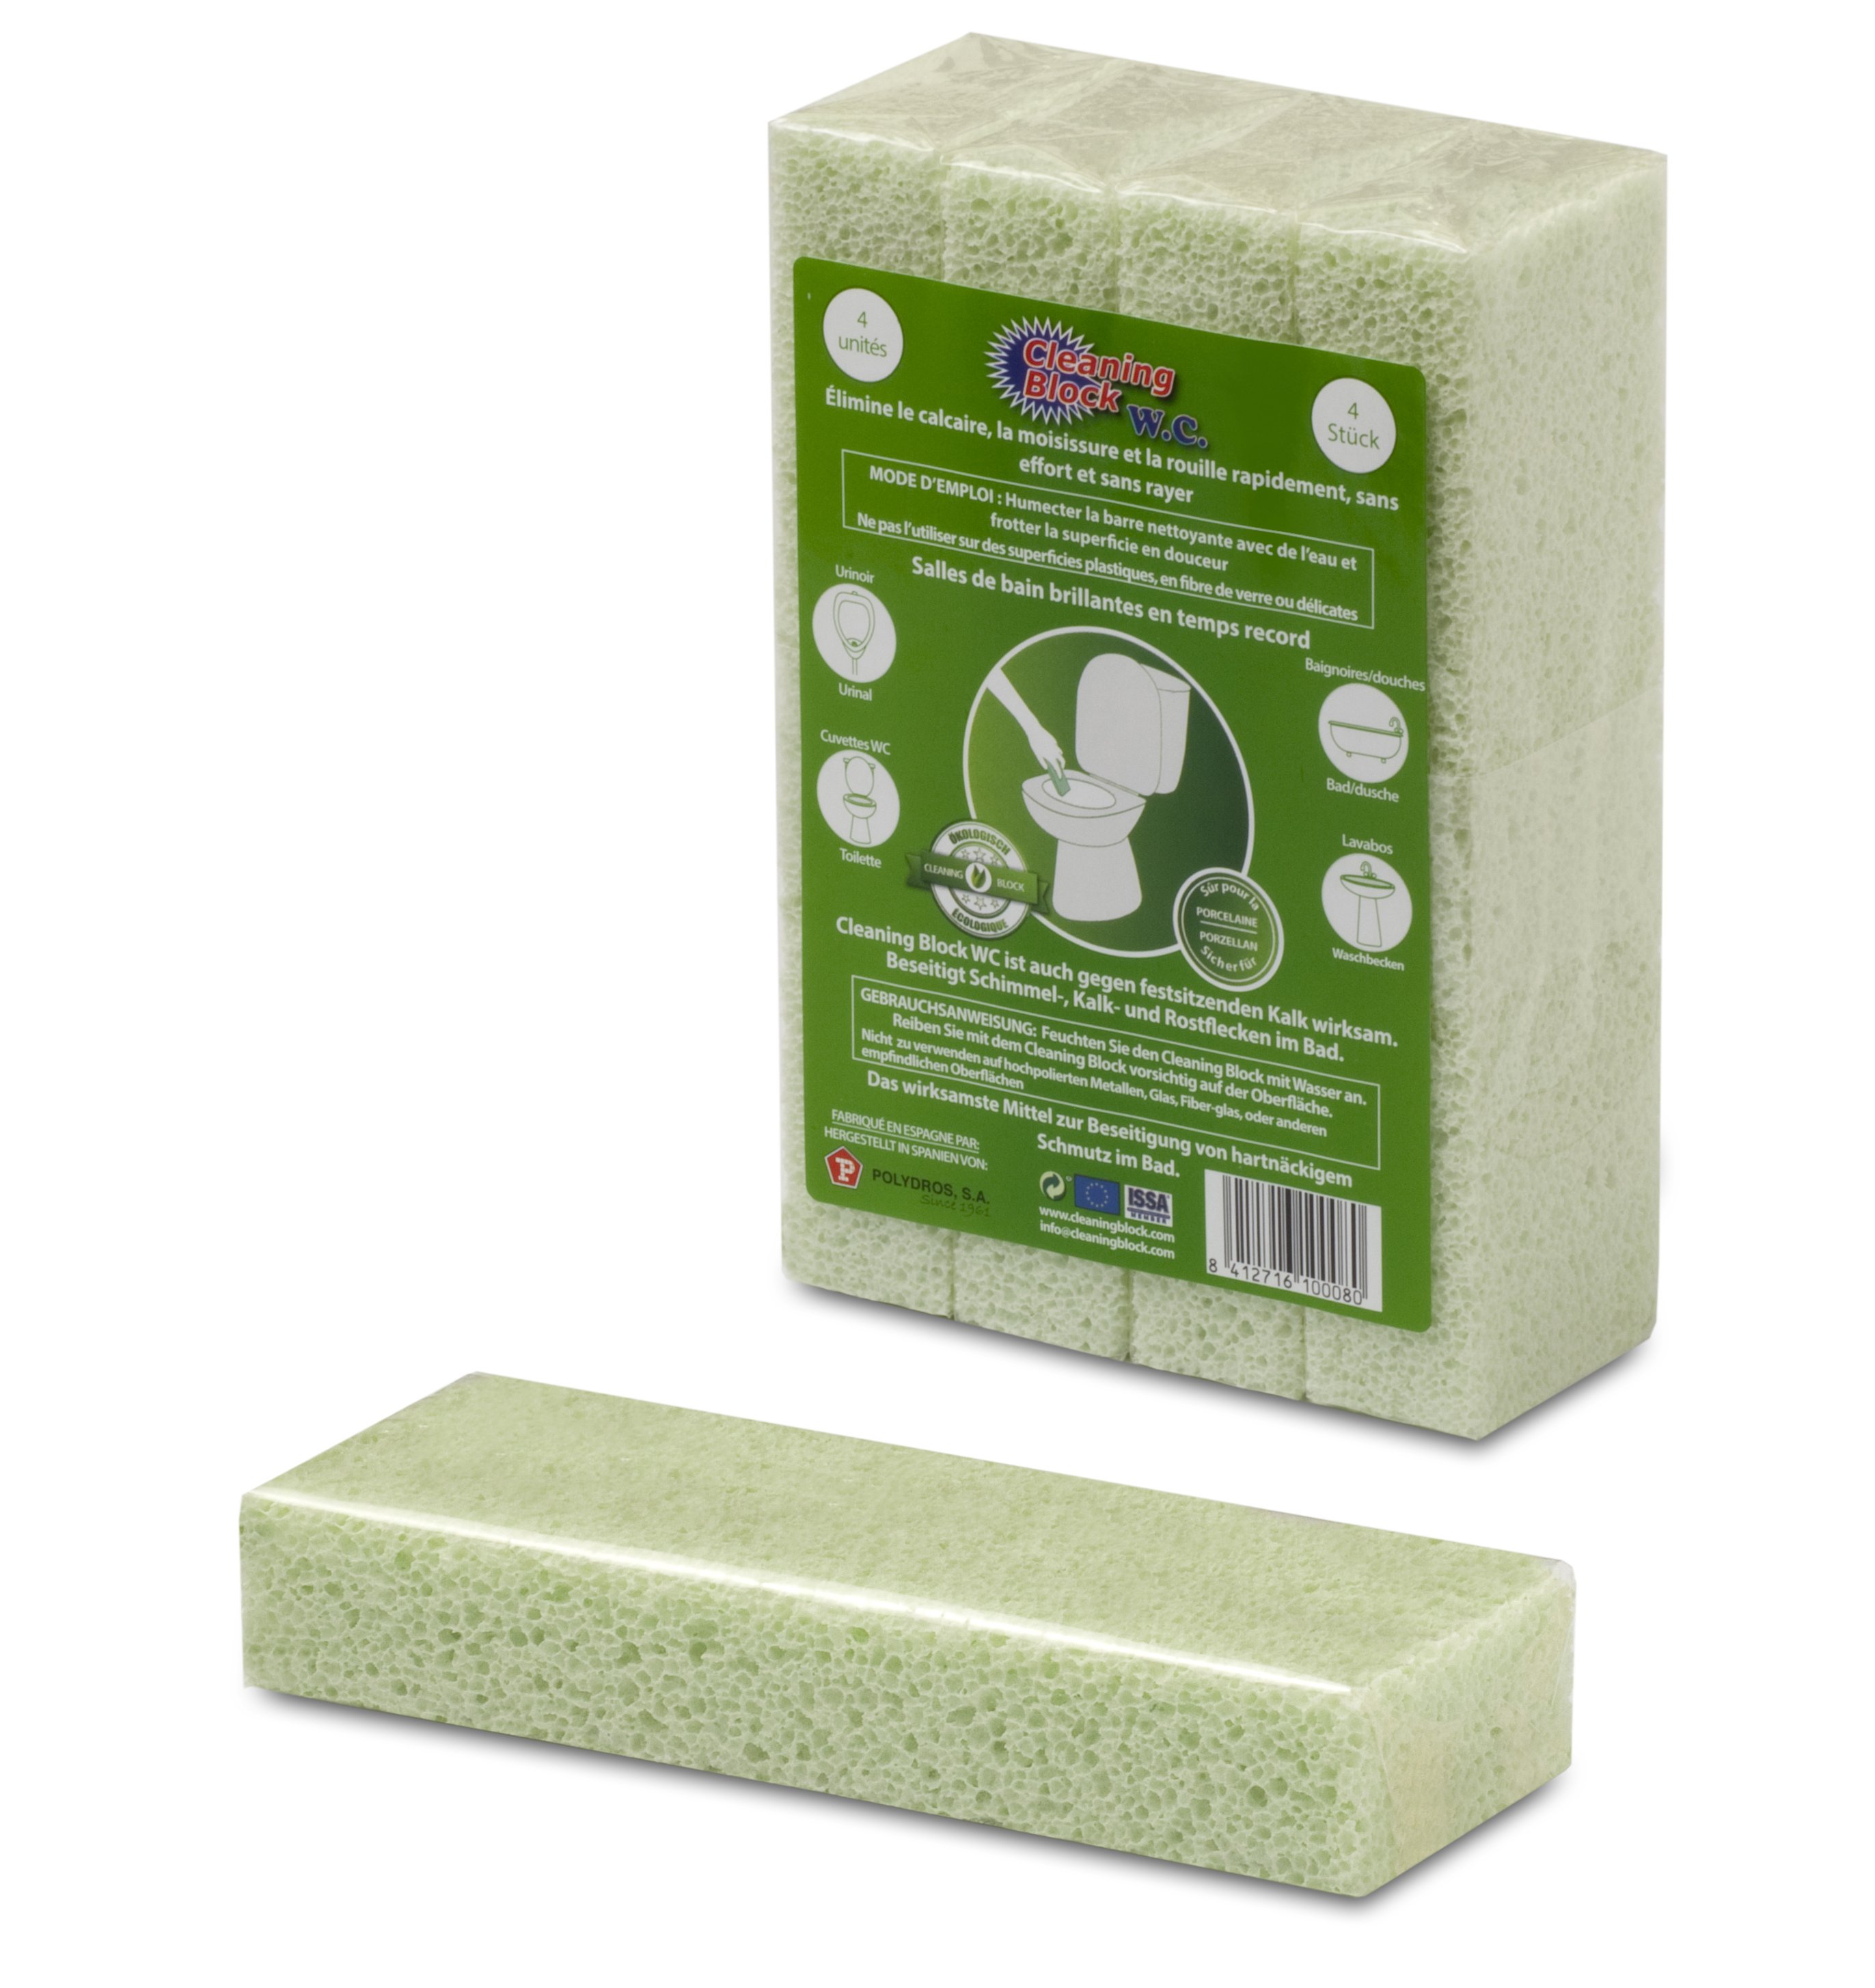 Cleaning Block WC | 1136